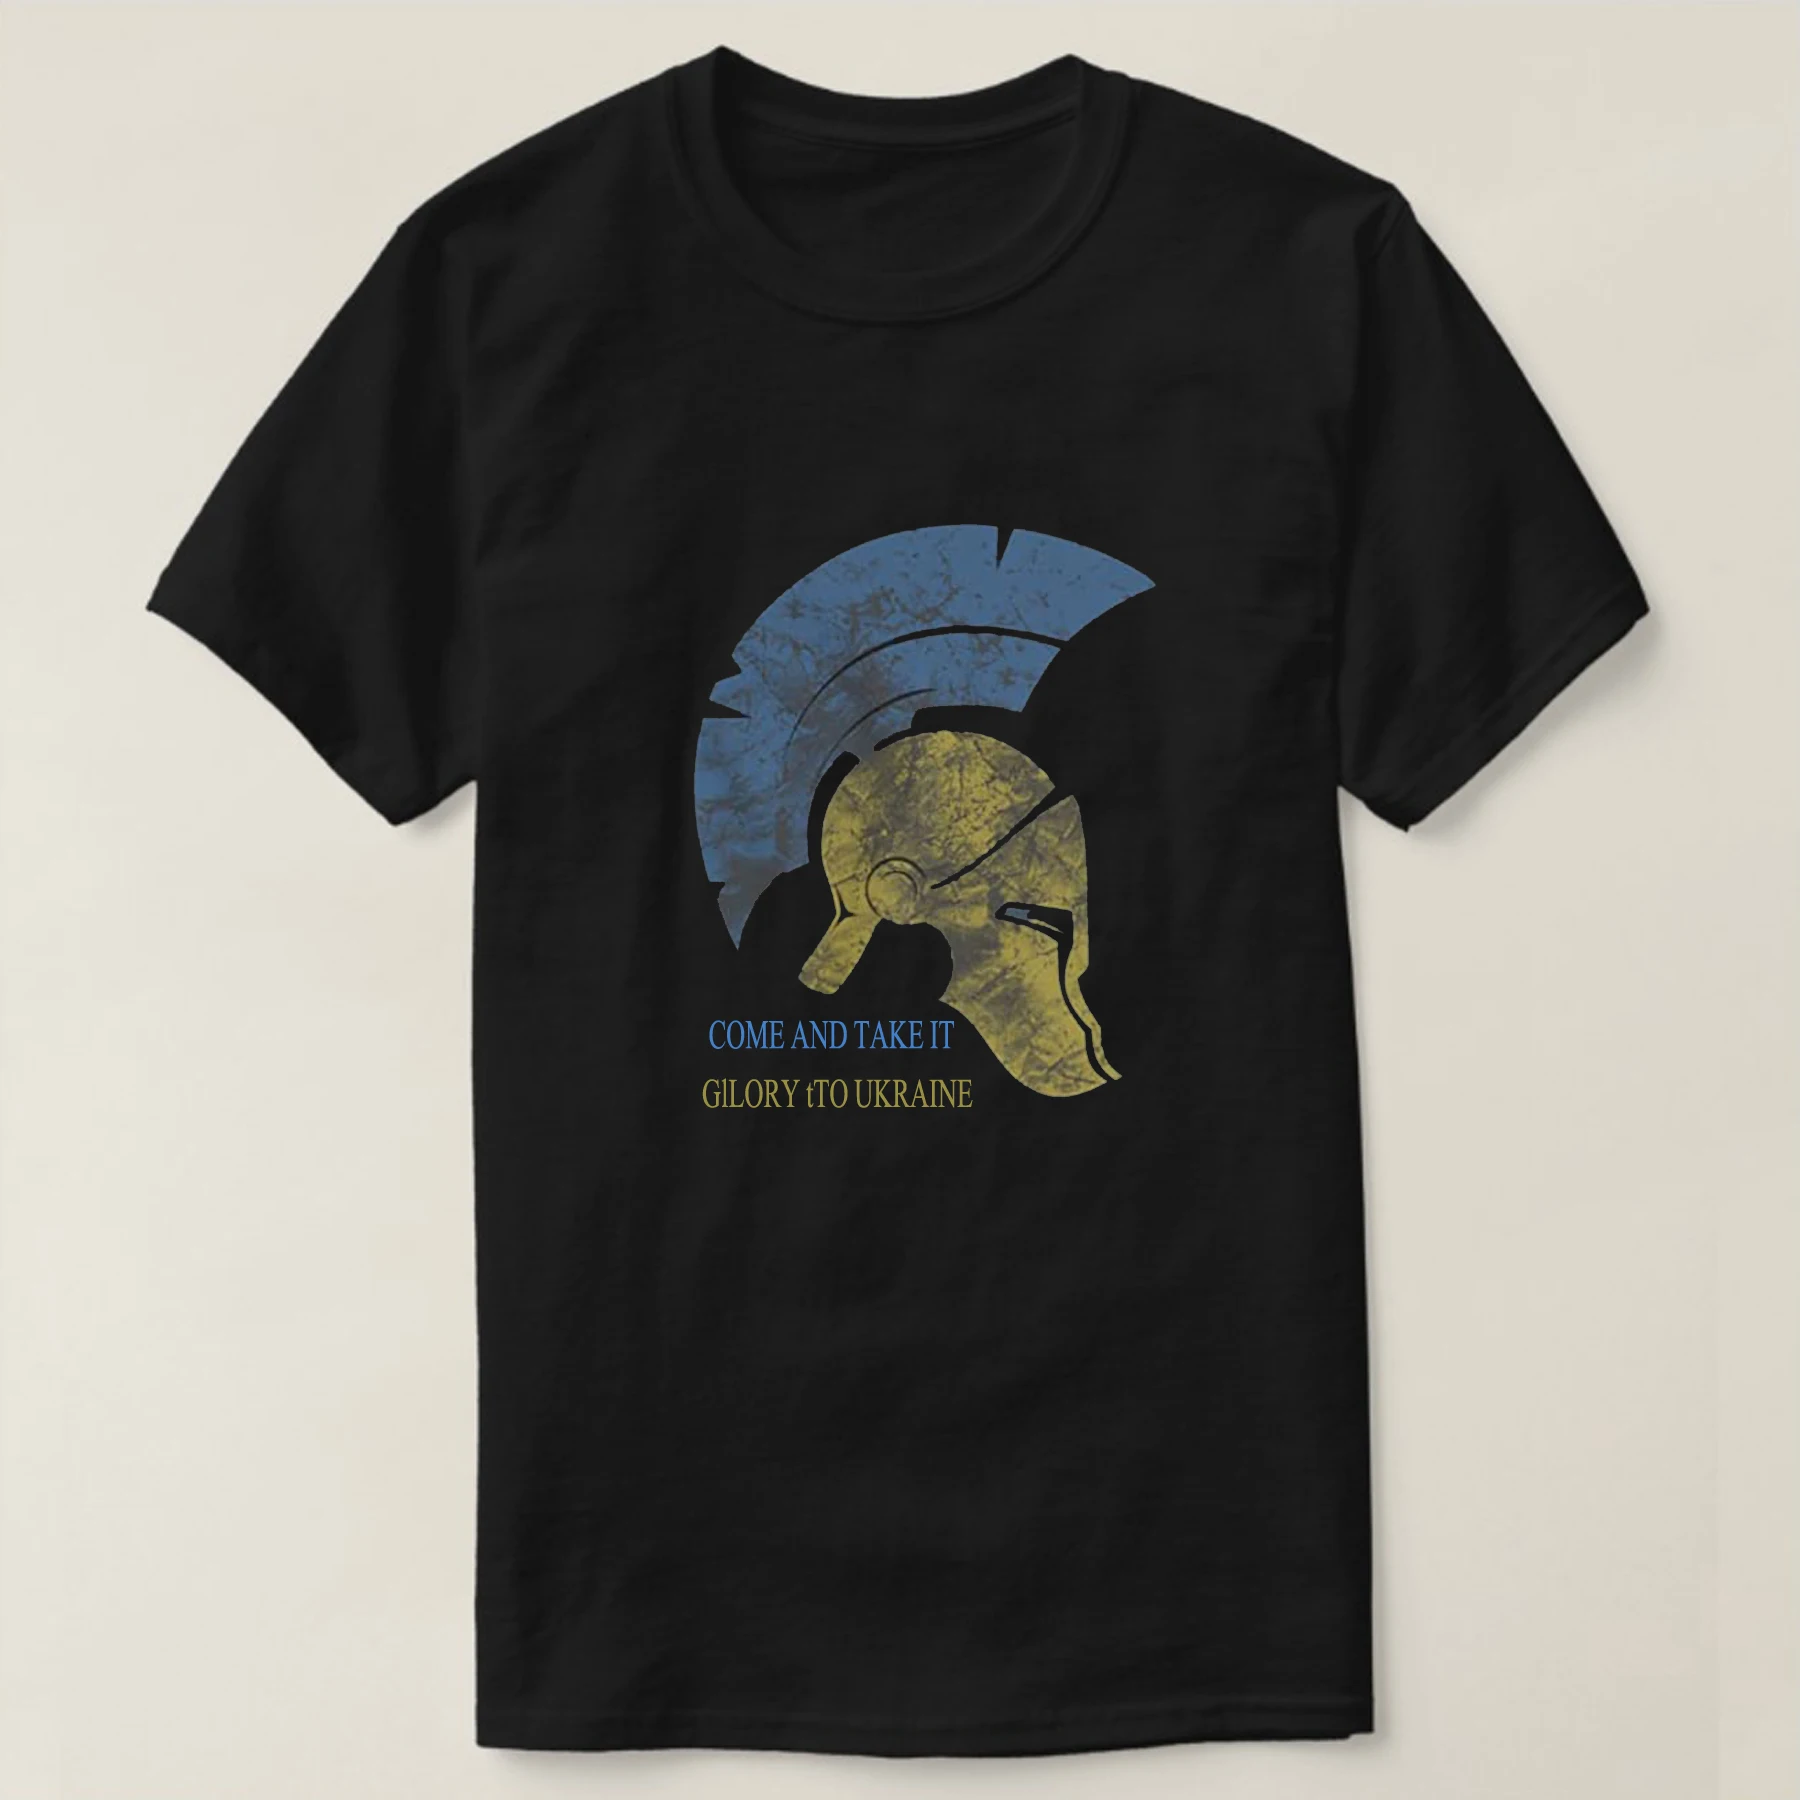 

Come and Take It. Glory To Ukraine. Ukrainian Flag Spartan Warrior Helmet T Shirt. 100% Cotton Casual T-shirts Loose Top S-3XL